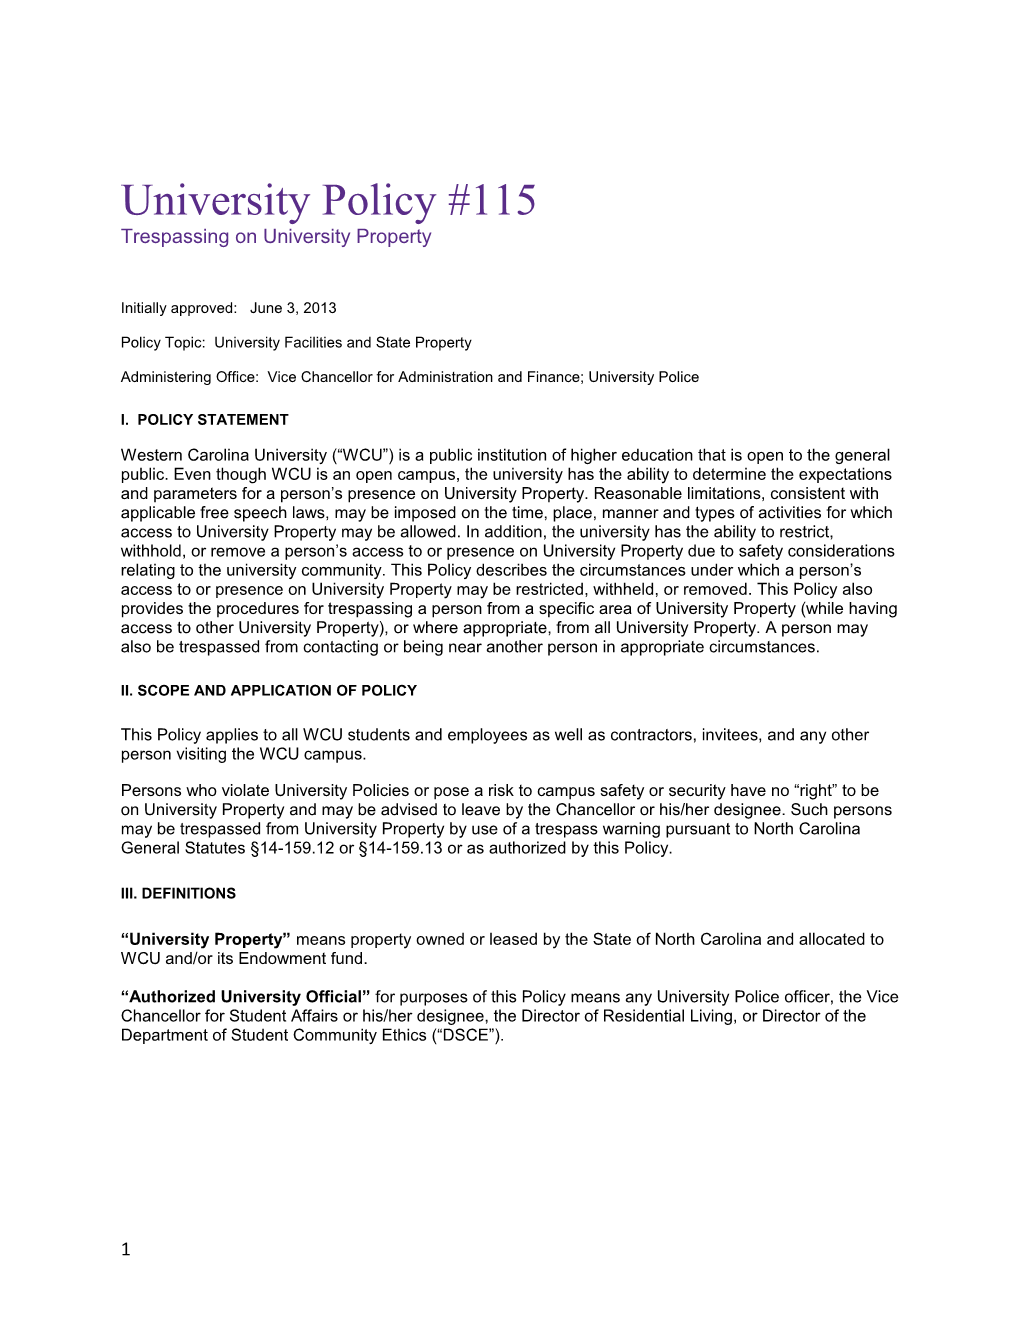 Policy Topic: University Facilities and State Property